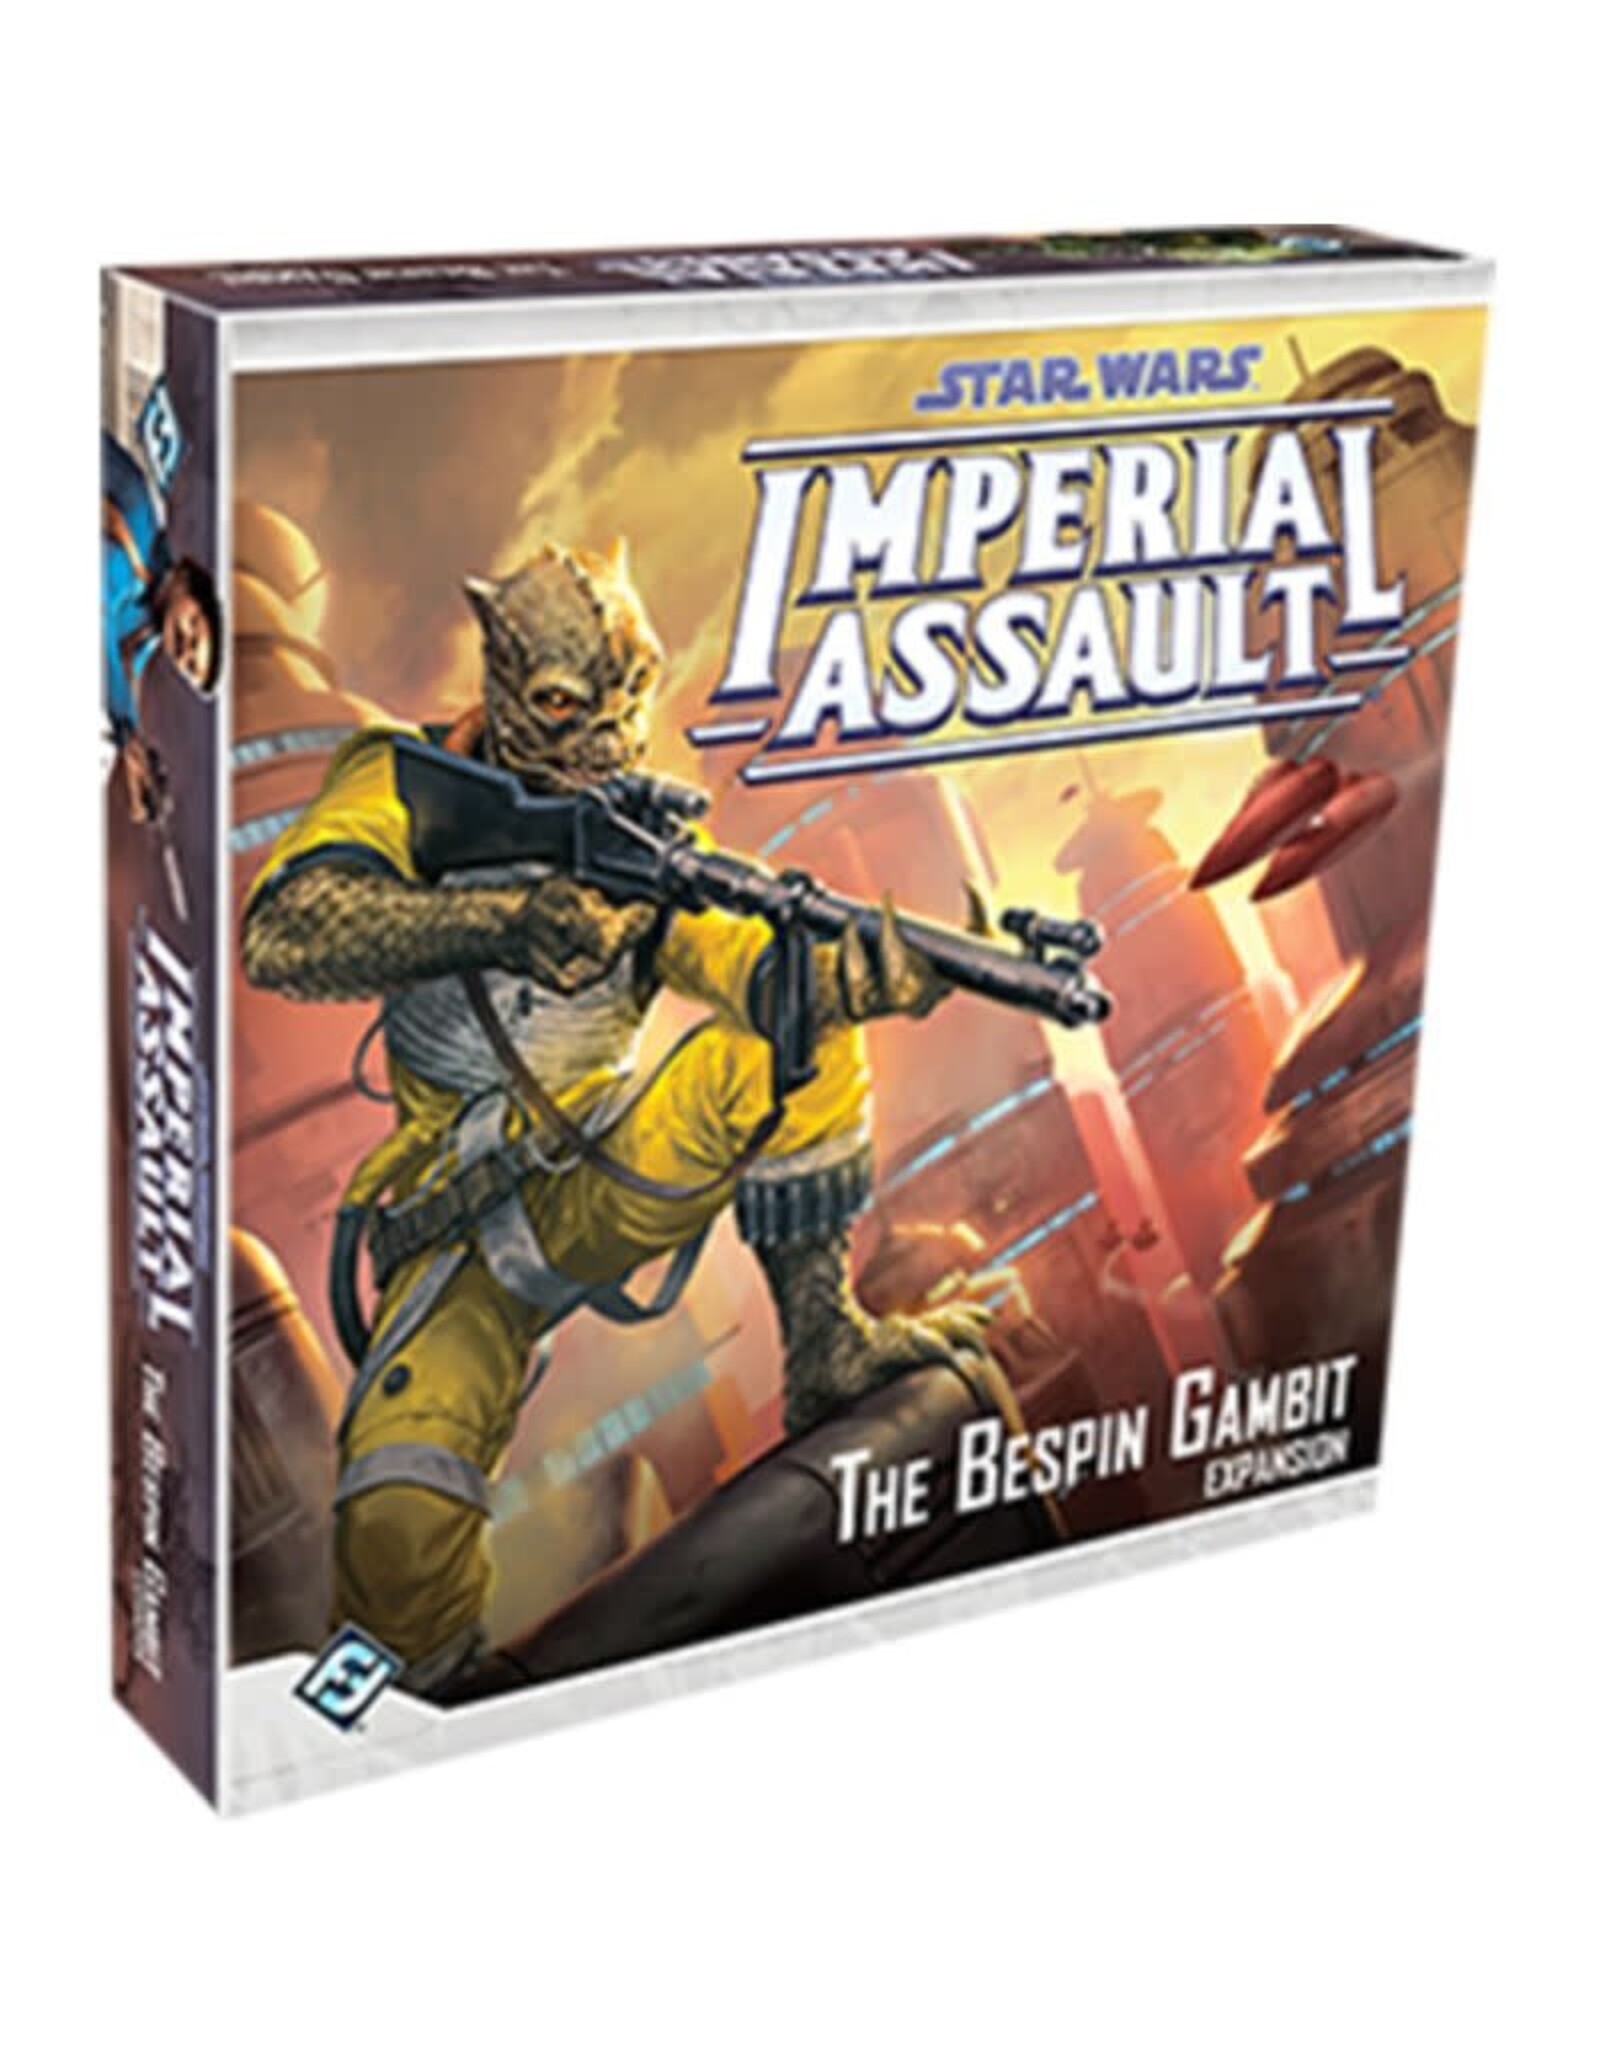 (S/O) Star Wars Imperial Assault: The Bespin Gambit Campaign